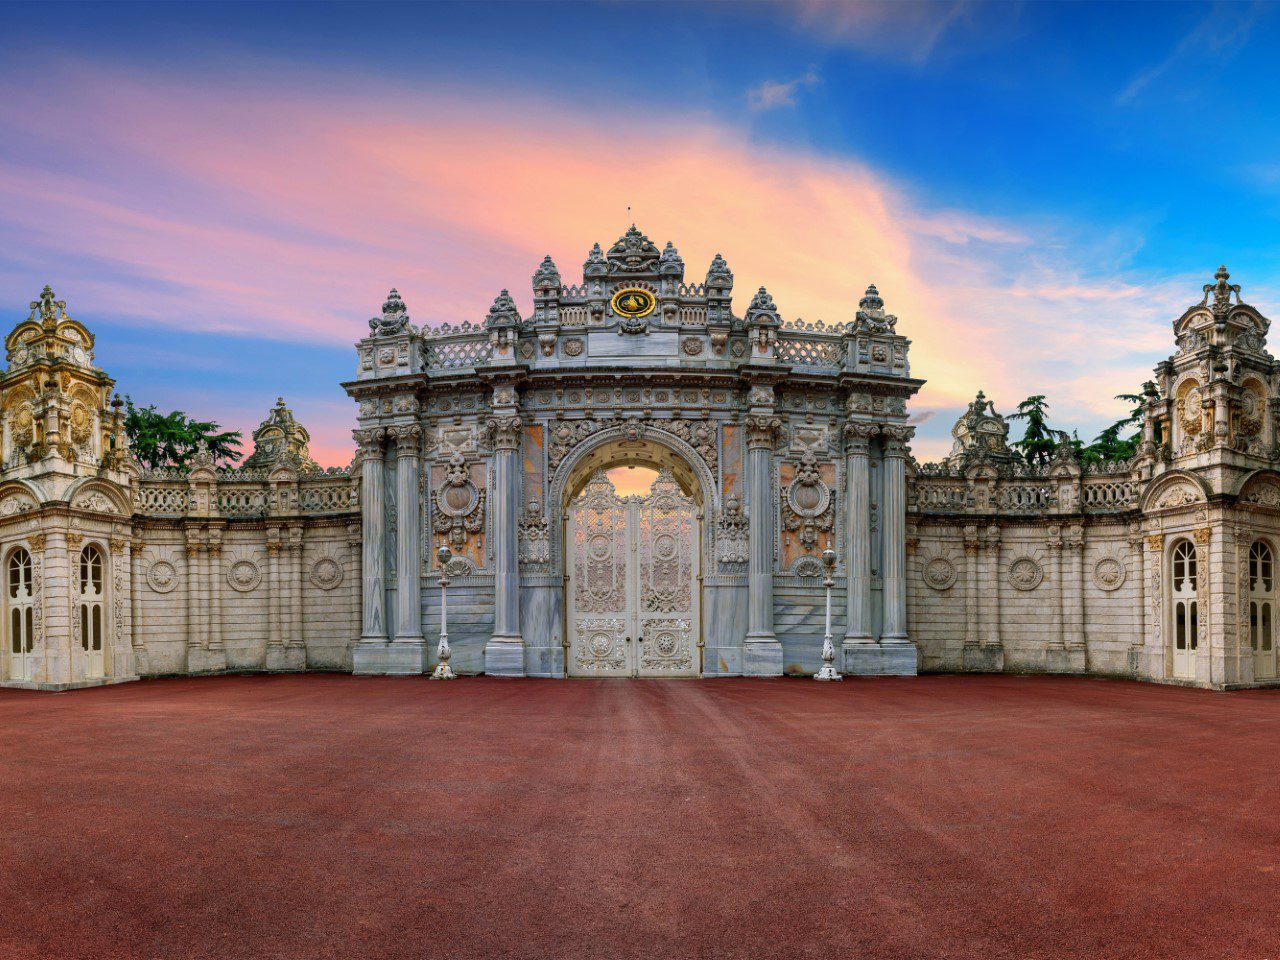 Dolmabahce Palace: A Majestic Treasure